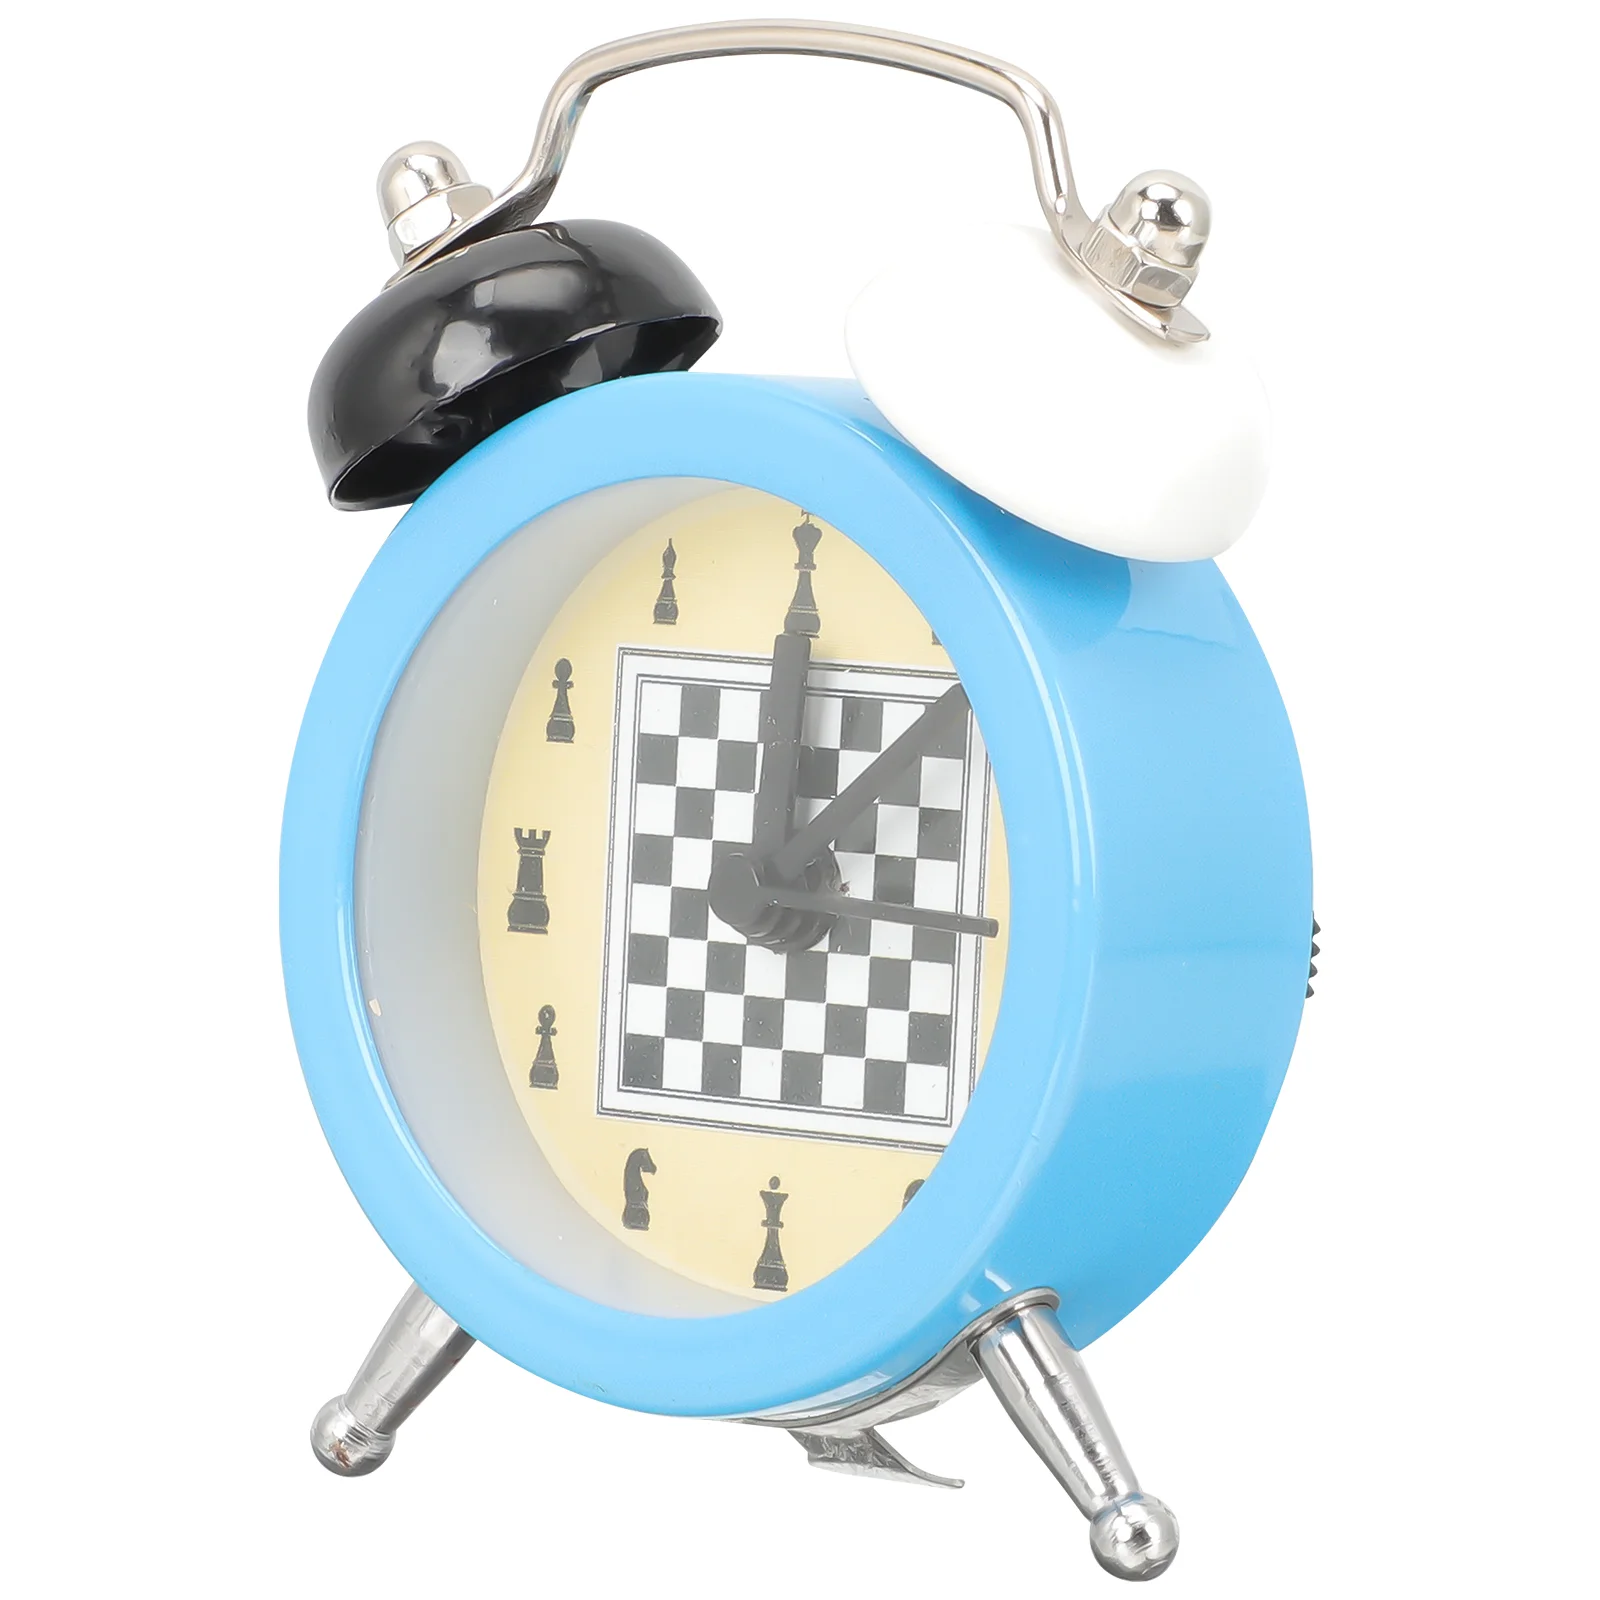 

Clock Alarm Chess Mini Bedside Table Timer Travel Analog Bell Twin Pattern Retro Decorative Ticking Non Loud Bedroom Kids Up